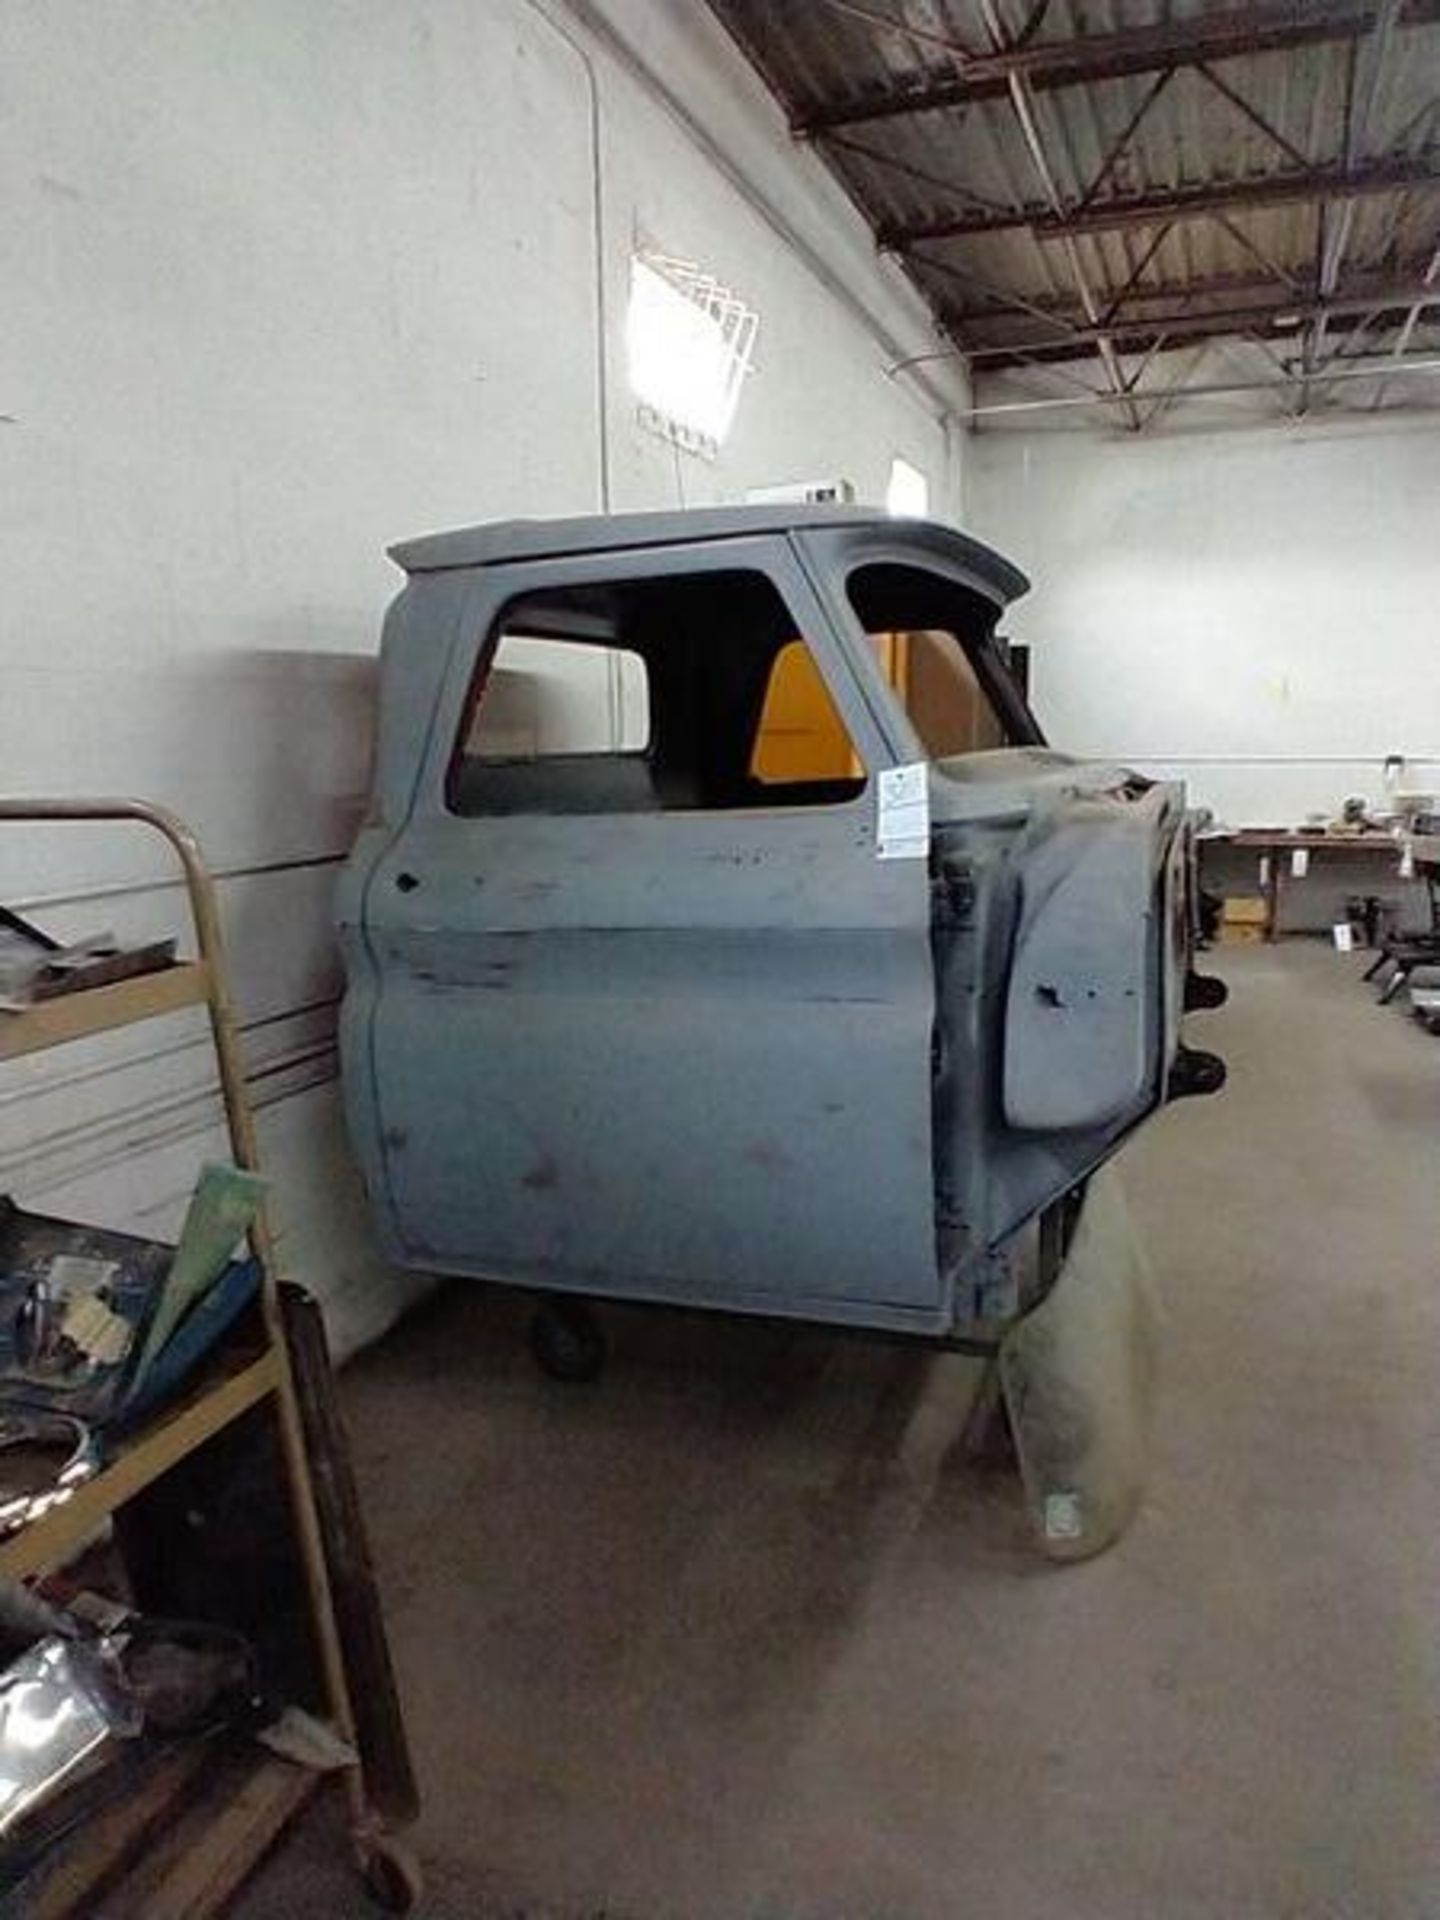 60'S CHEVY TRUCK CAB (WITH CART) - Image 2 of 6